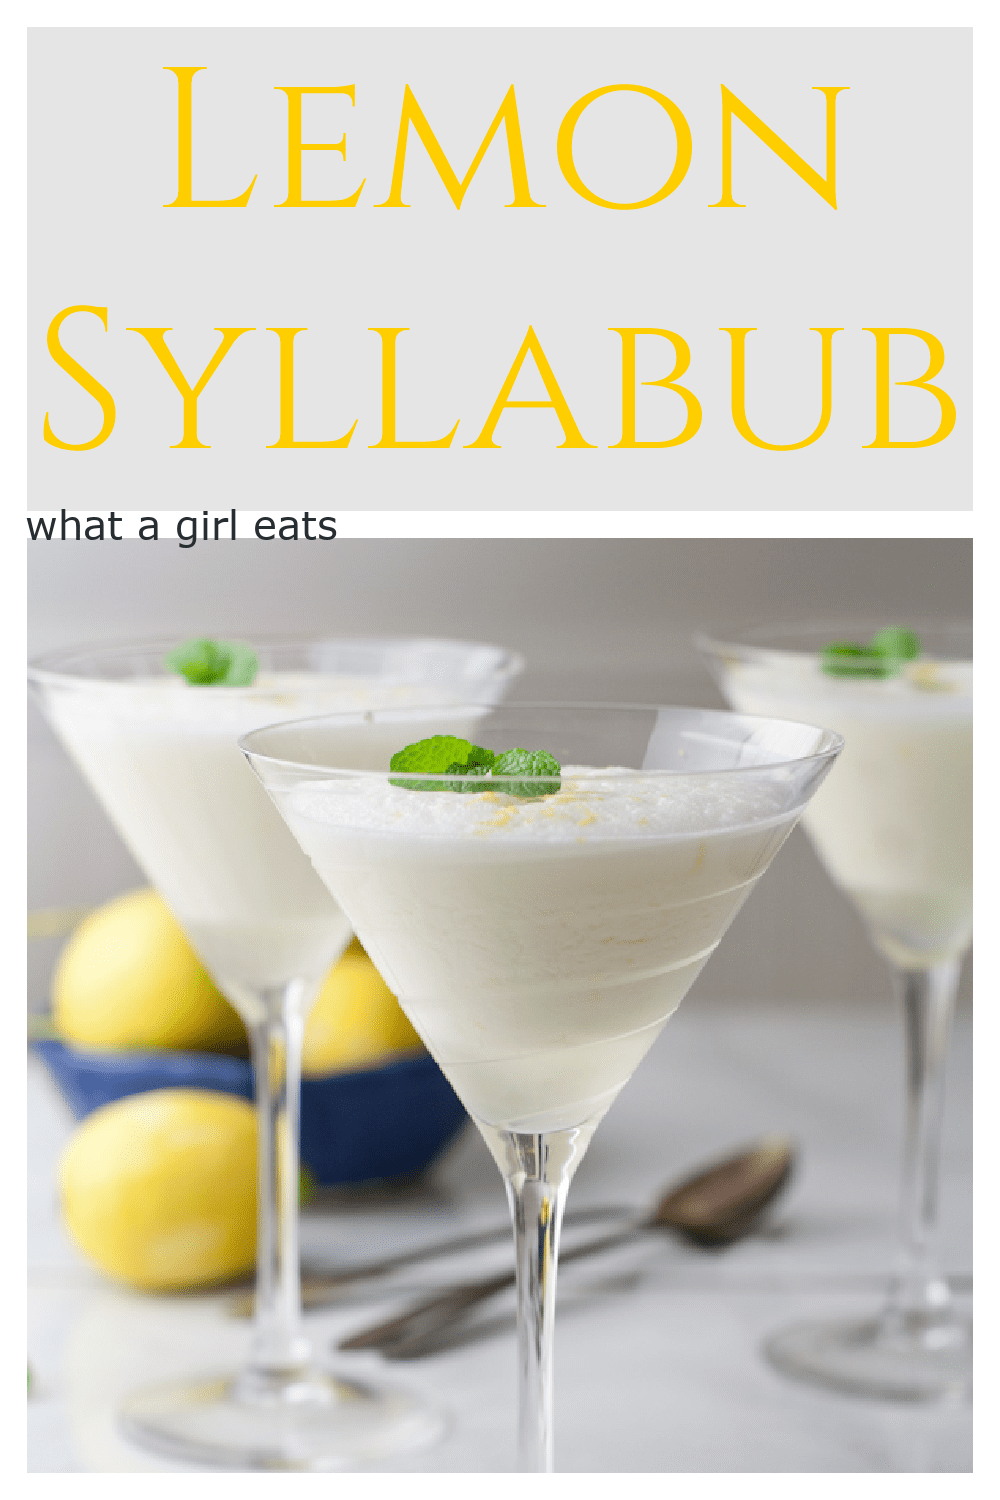 Syllabub is an old English dessert, made with white wine, sugar, heavy cream. It was popular from the 16th century to 18th centuries.